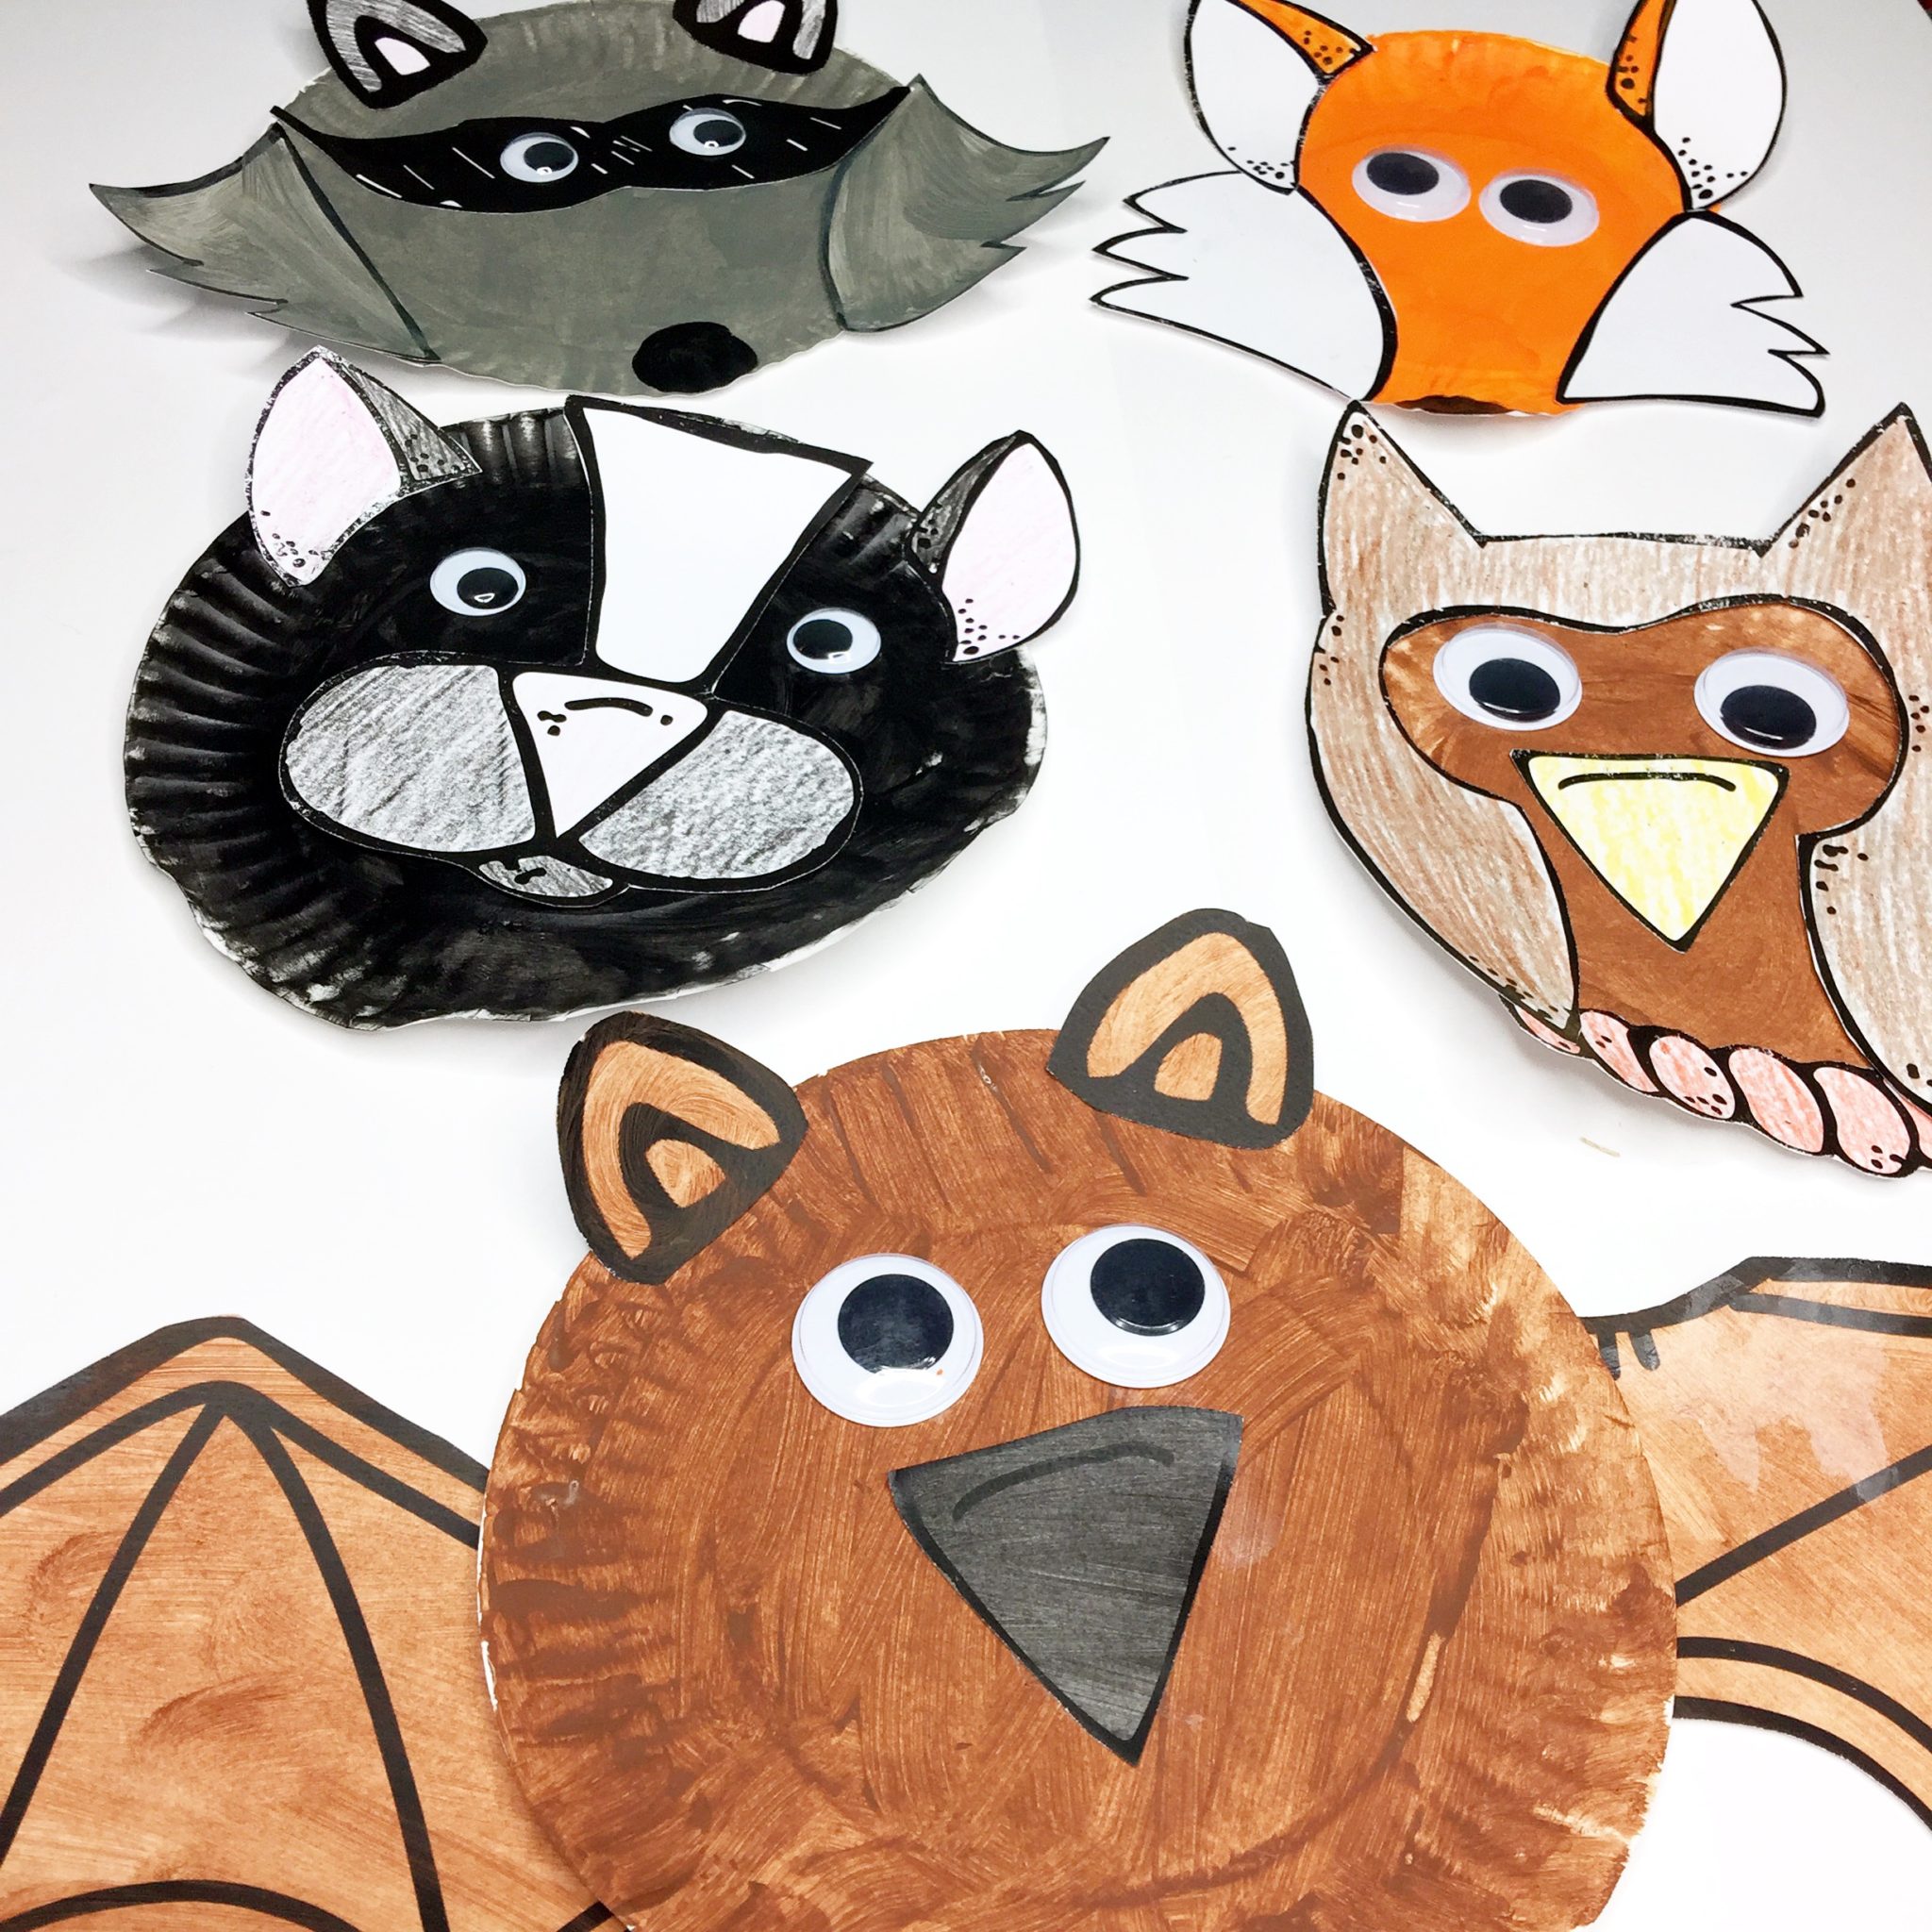 Nocturnal Animal Crafts and Books - Keeping Up with Mrs. Harris